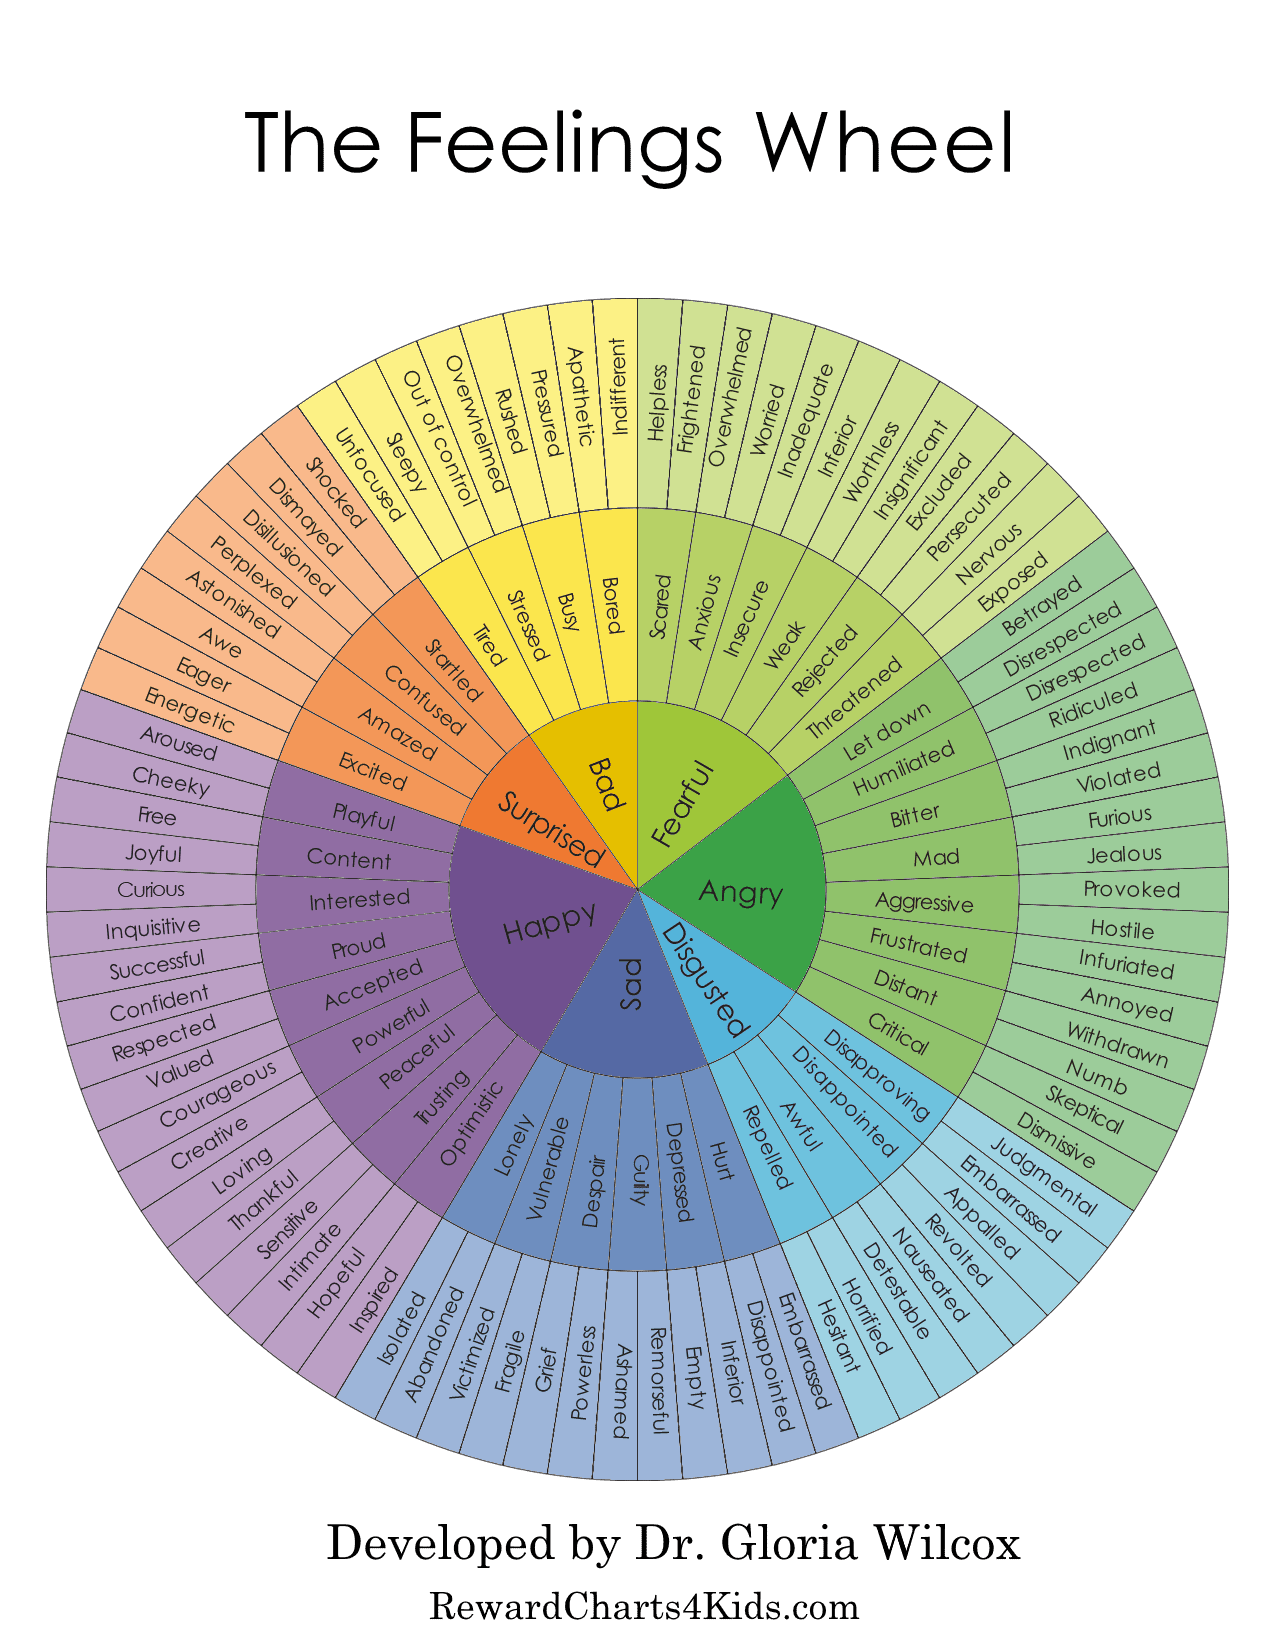 using-a-feelings-wheel-to-name-and-understand-emotions-hope-4-hurting